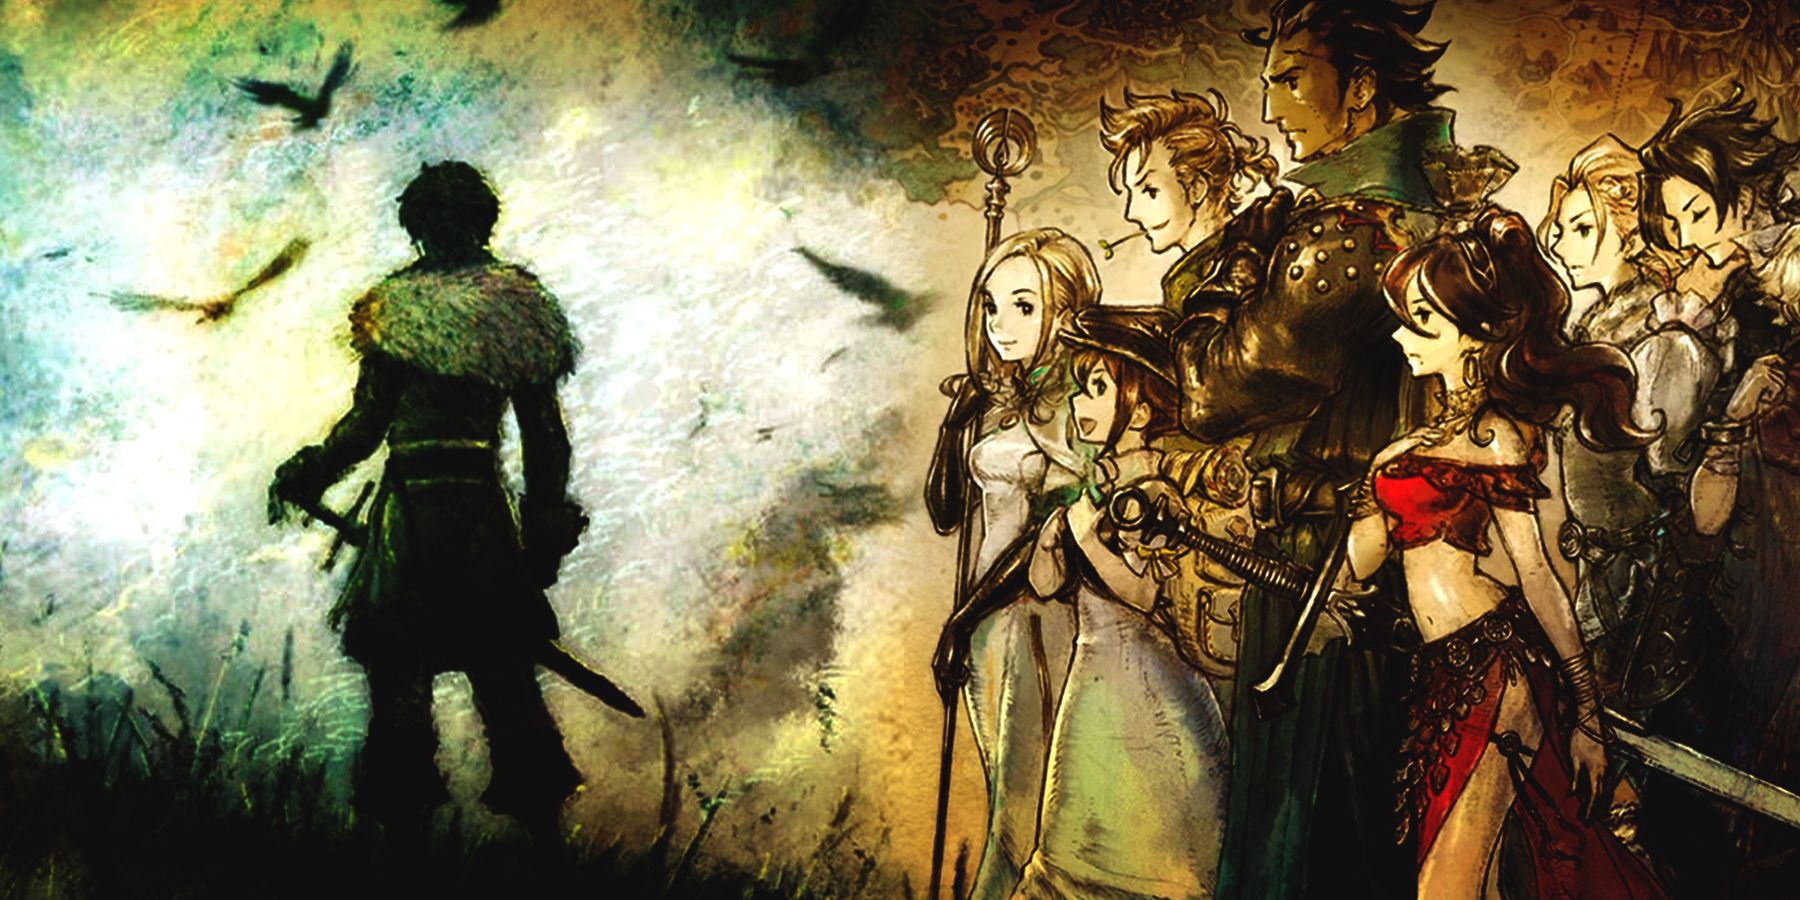 Octopath Traveler vs. Triangle Strategy Which HD-2D Game Is Better